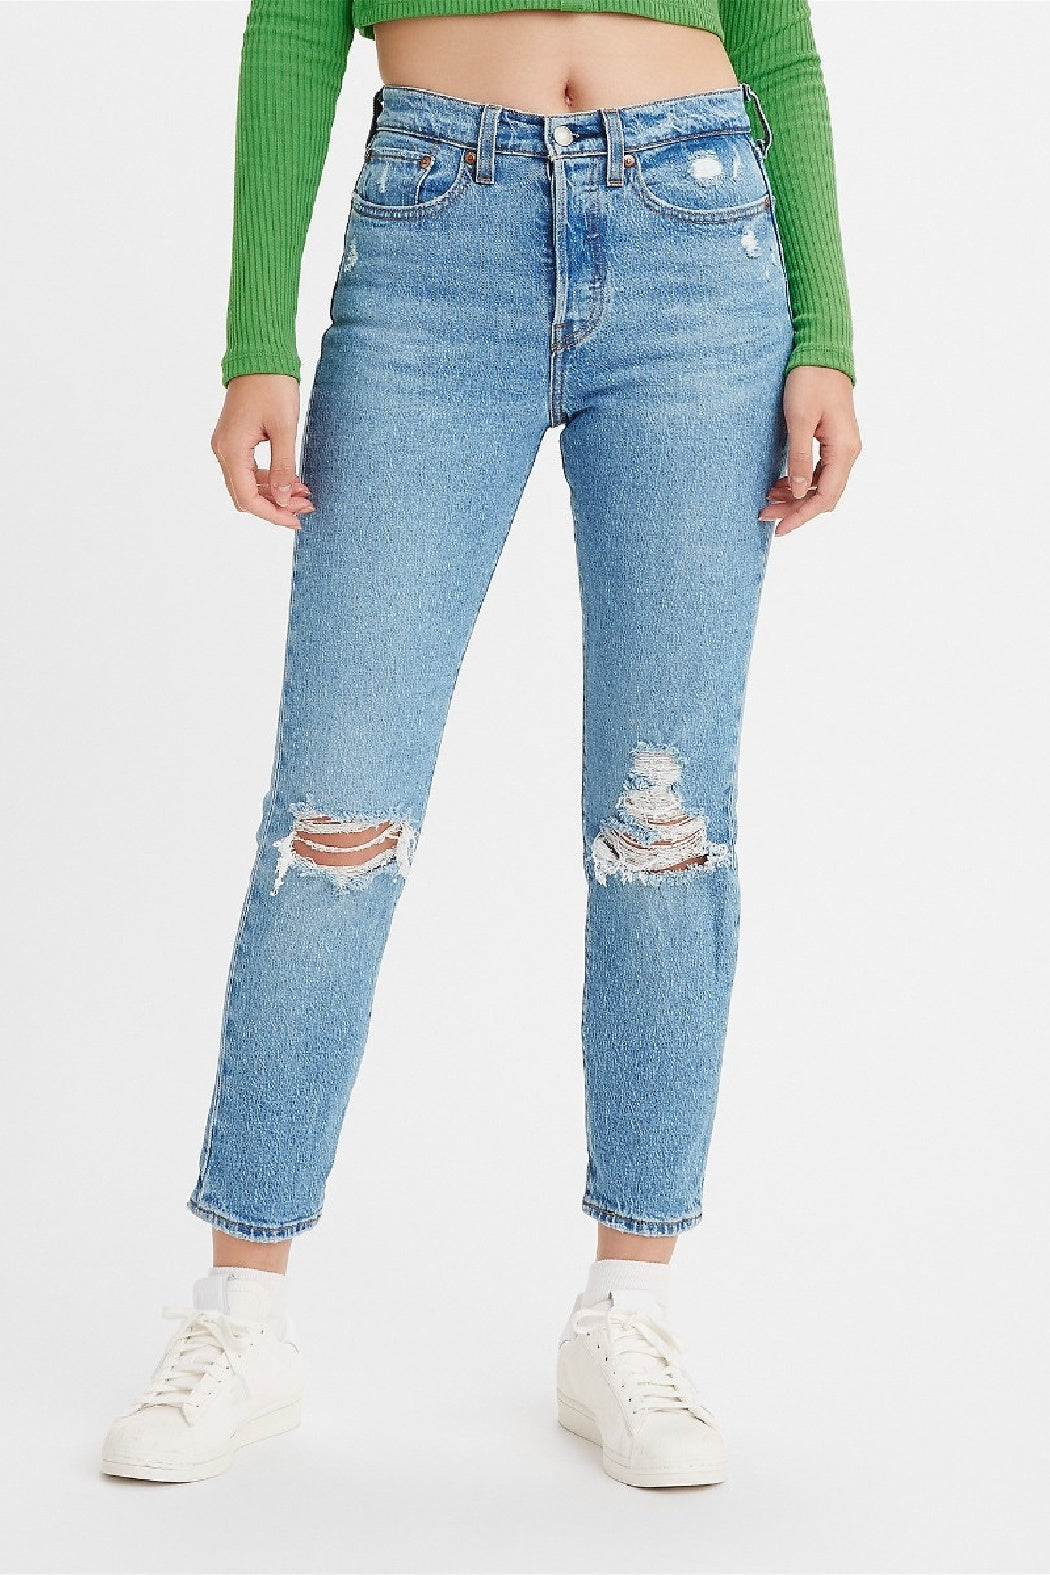 Wedgie Icon Fit Jeans - Jazz Devoted | Levis - Clearance